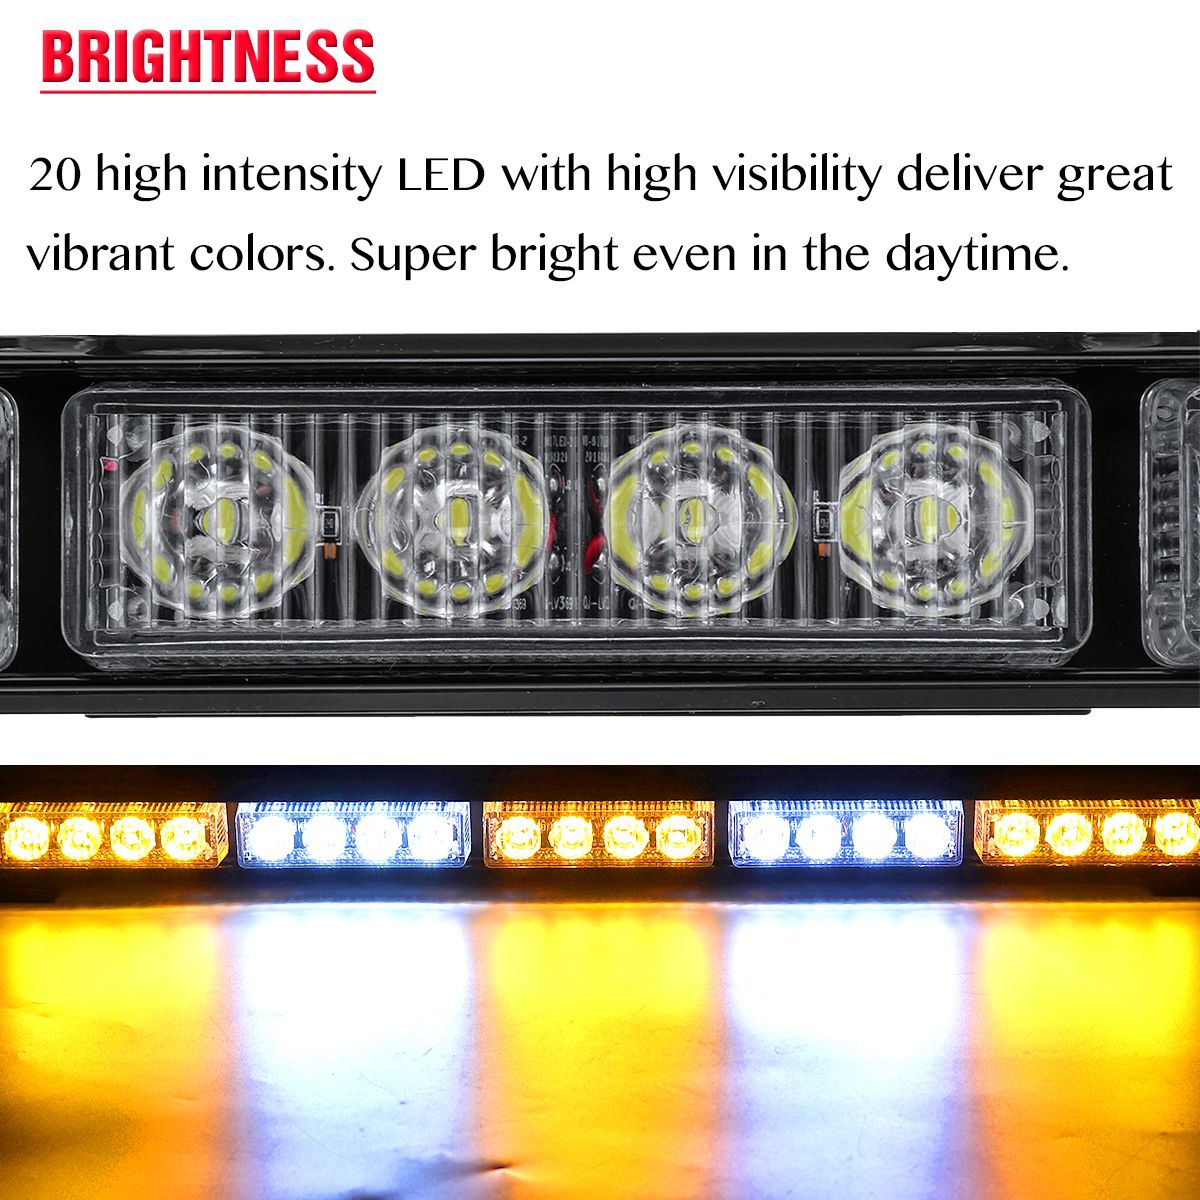 23Inch-12V-20-LED-Emergency-Warning-Strobe-Light-Bar-Amber--White-with-Large-Suction-Cups-Car-Lighte-1680464